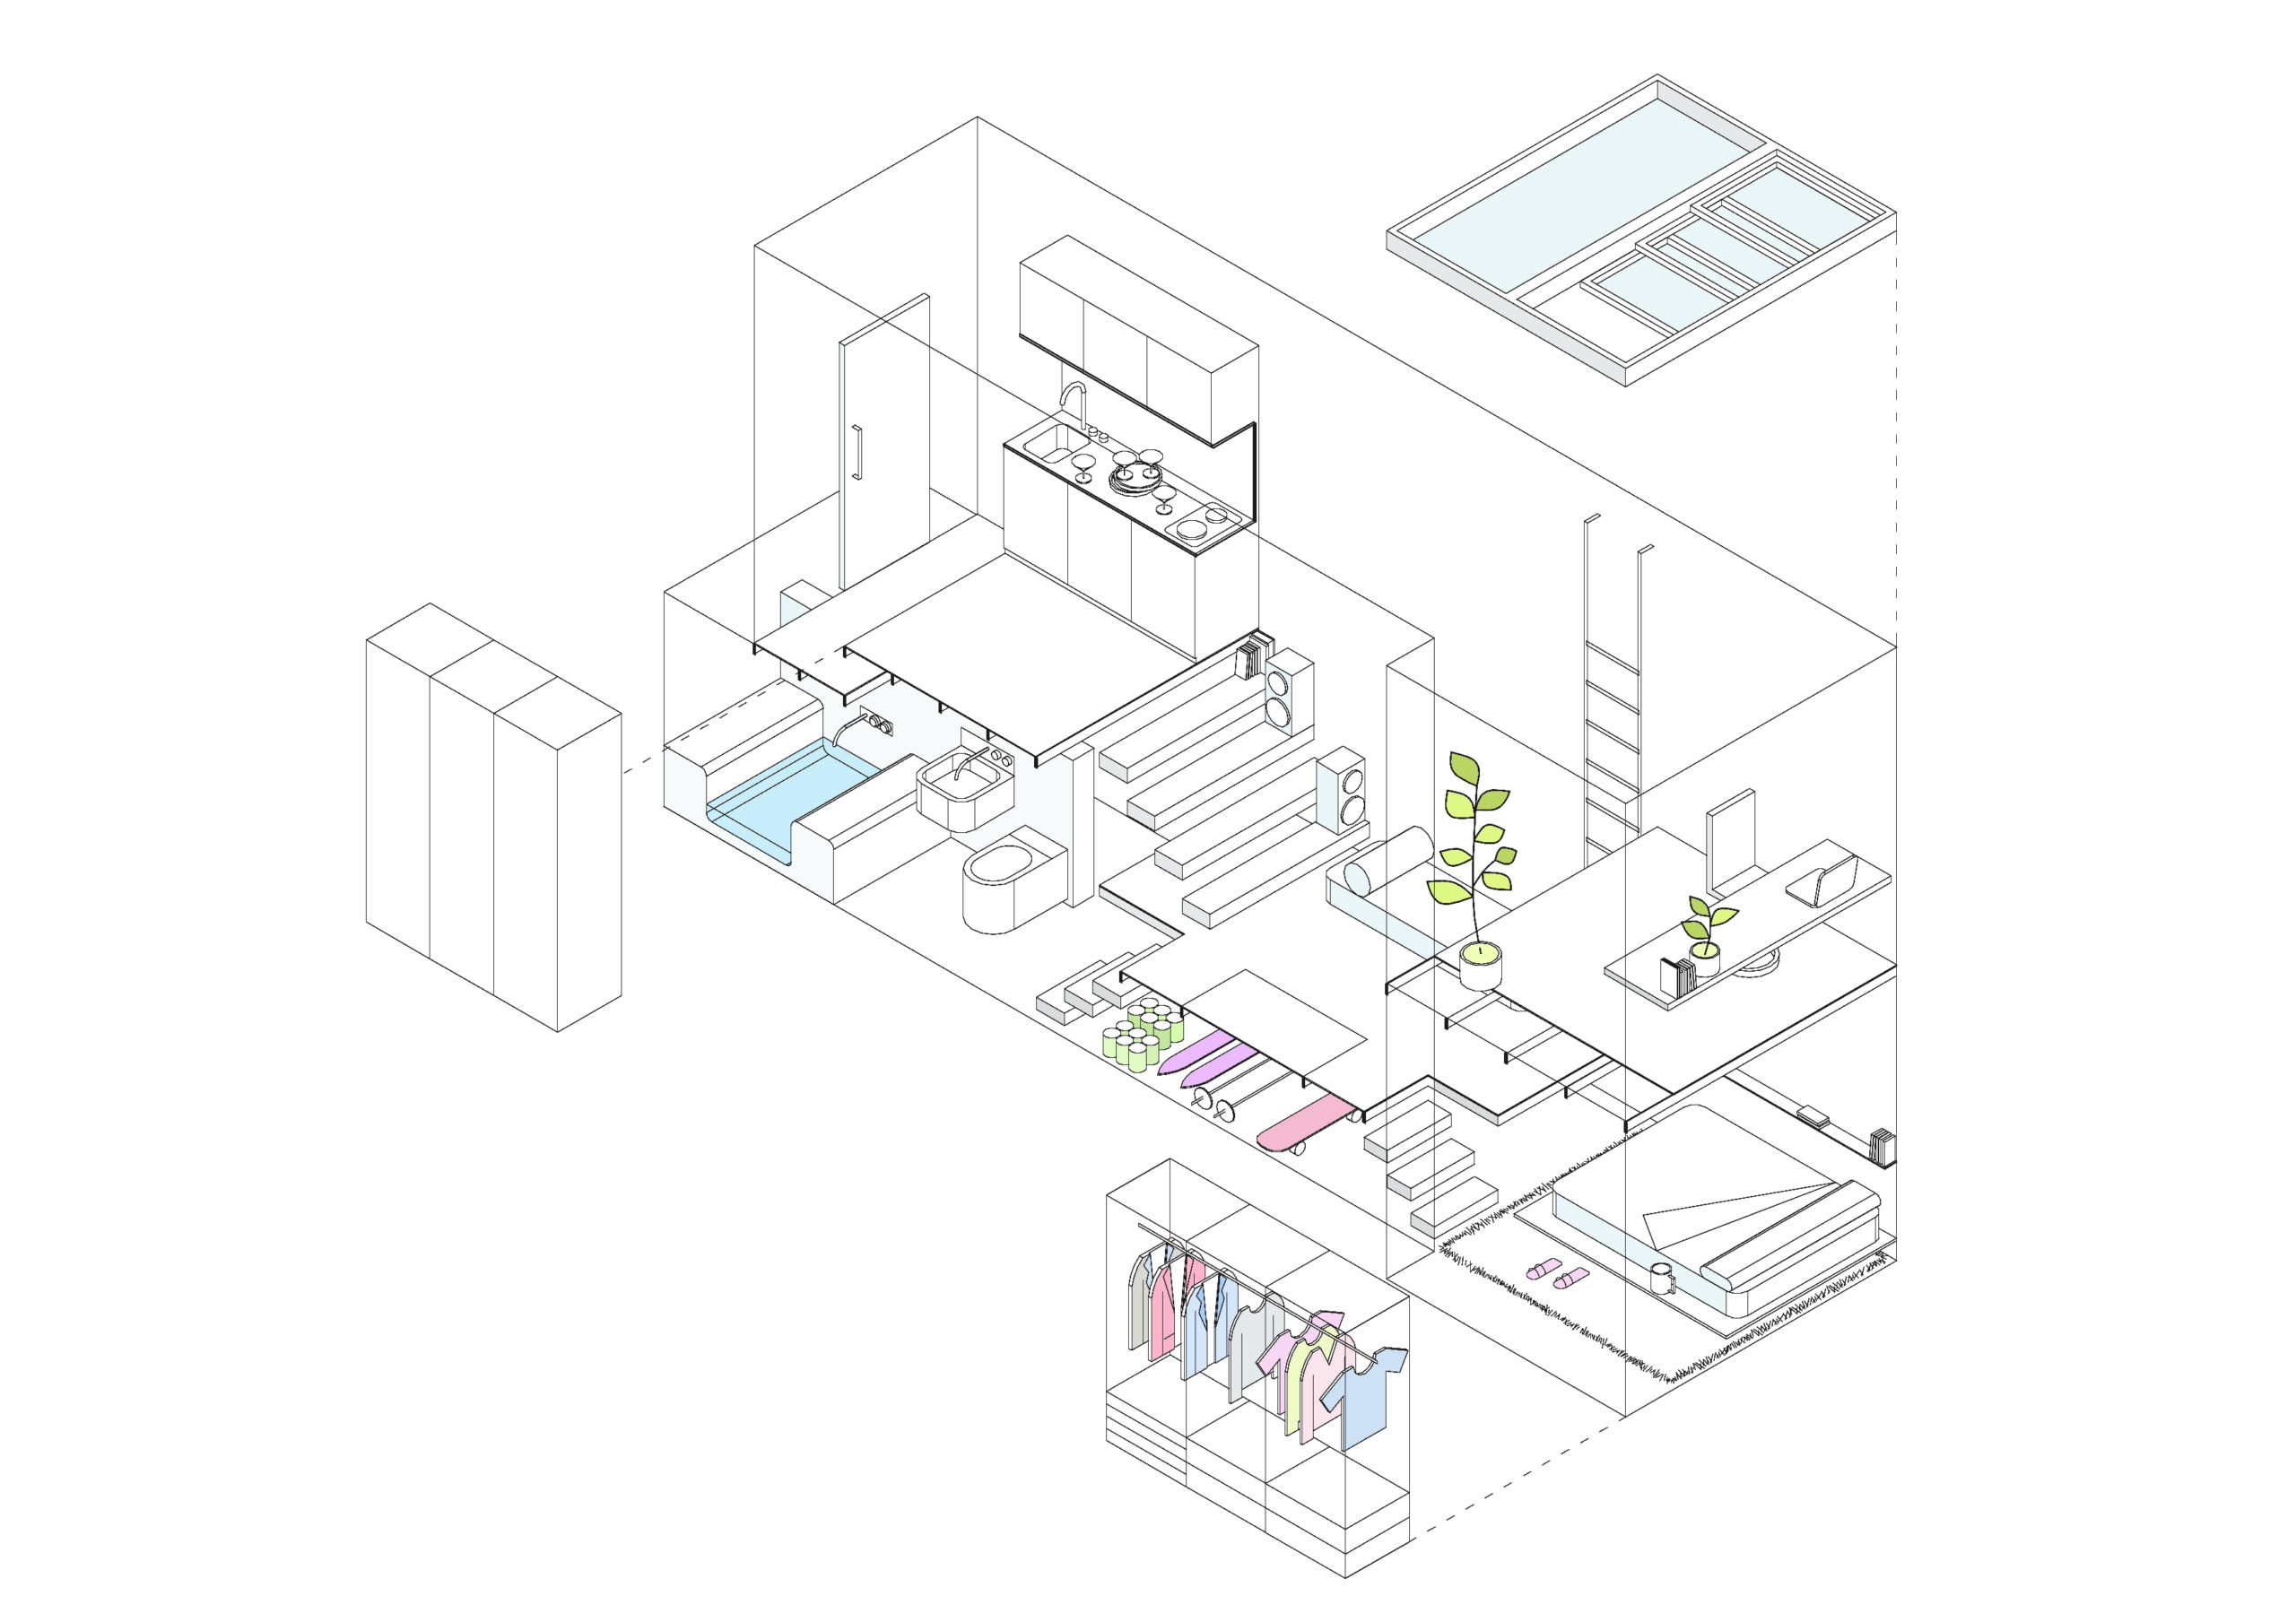 Architectural Diagrams: 10 Clever Storage Solutions for Tiny